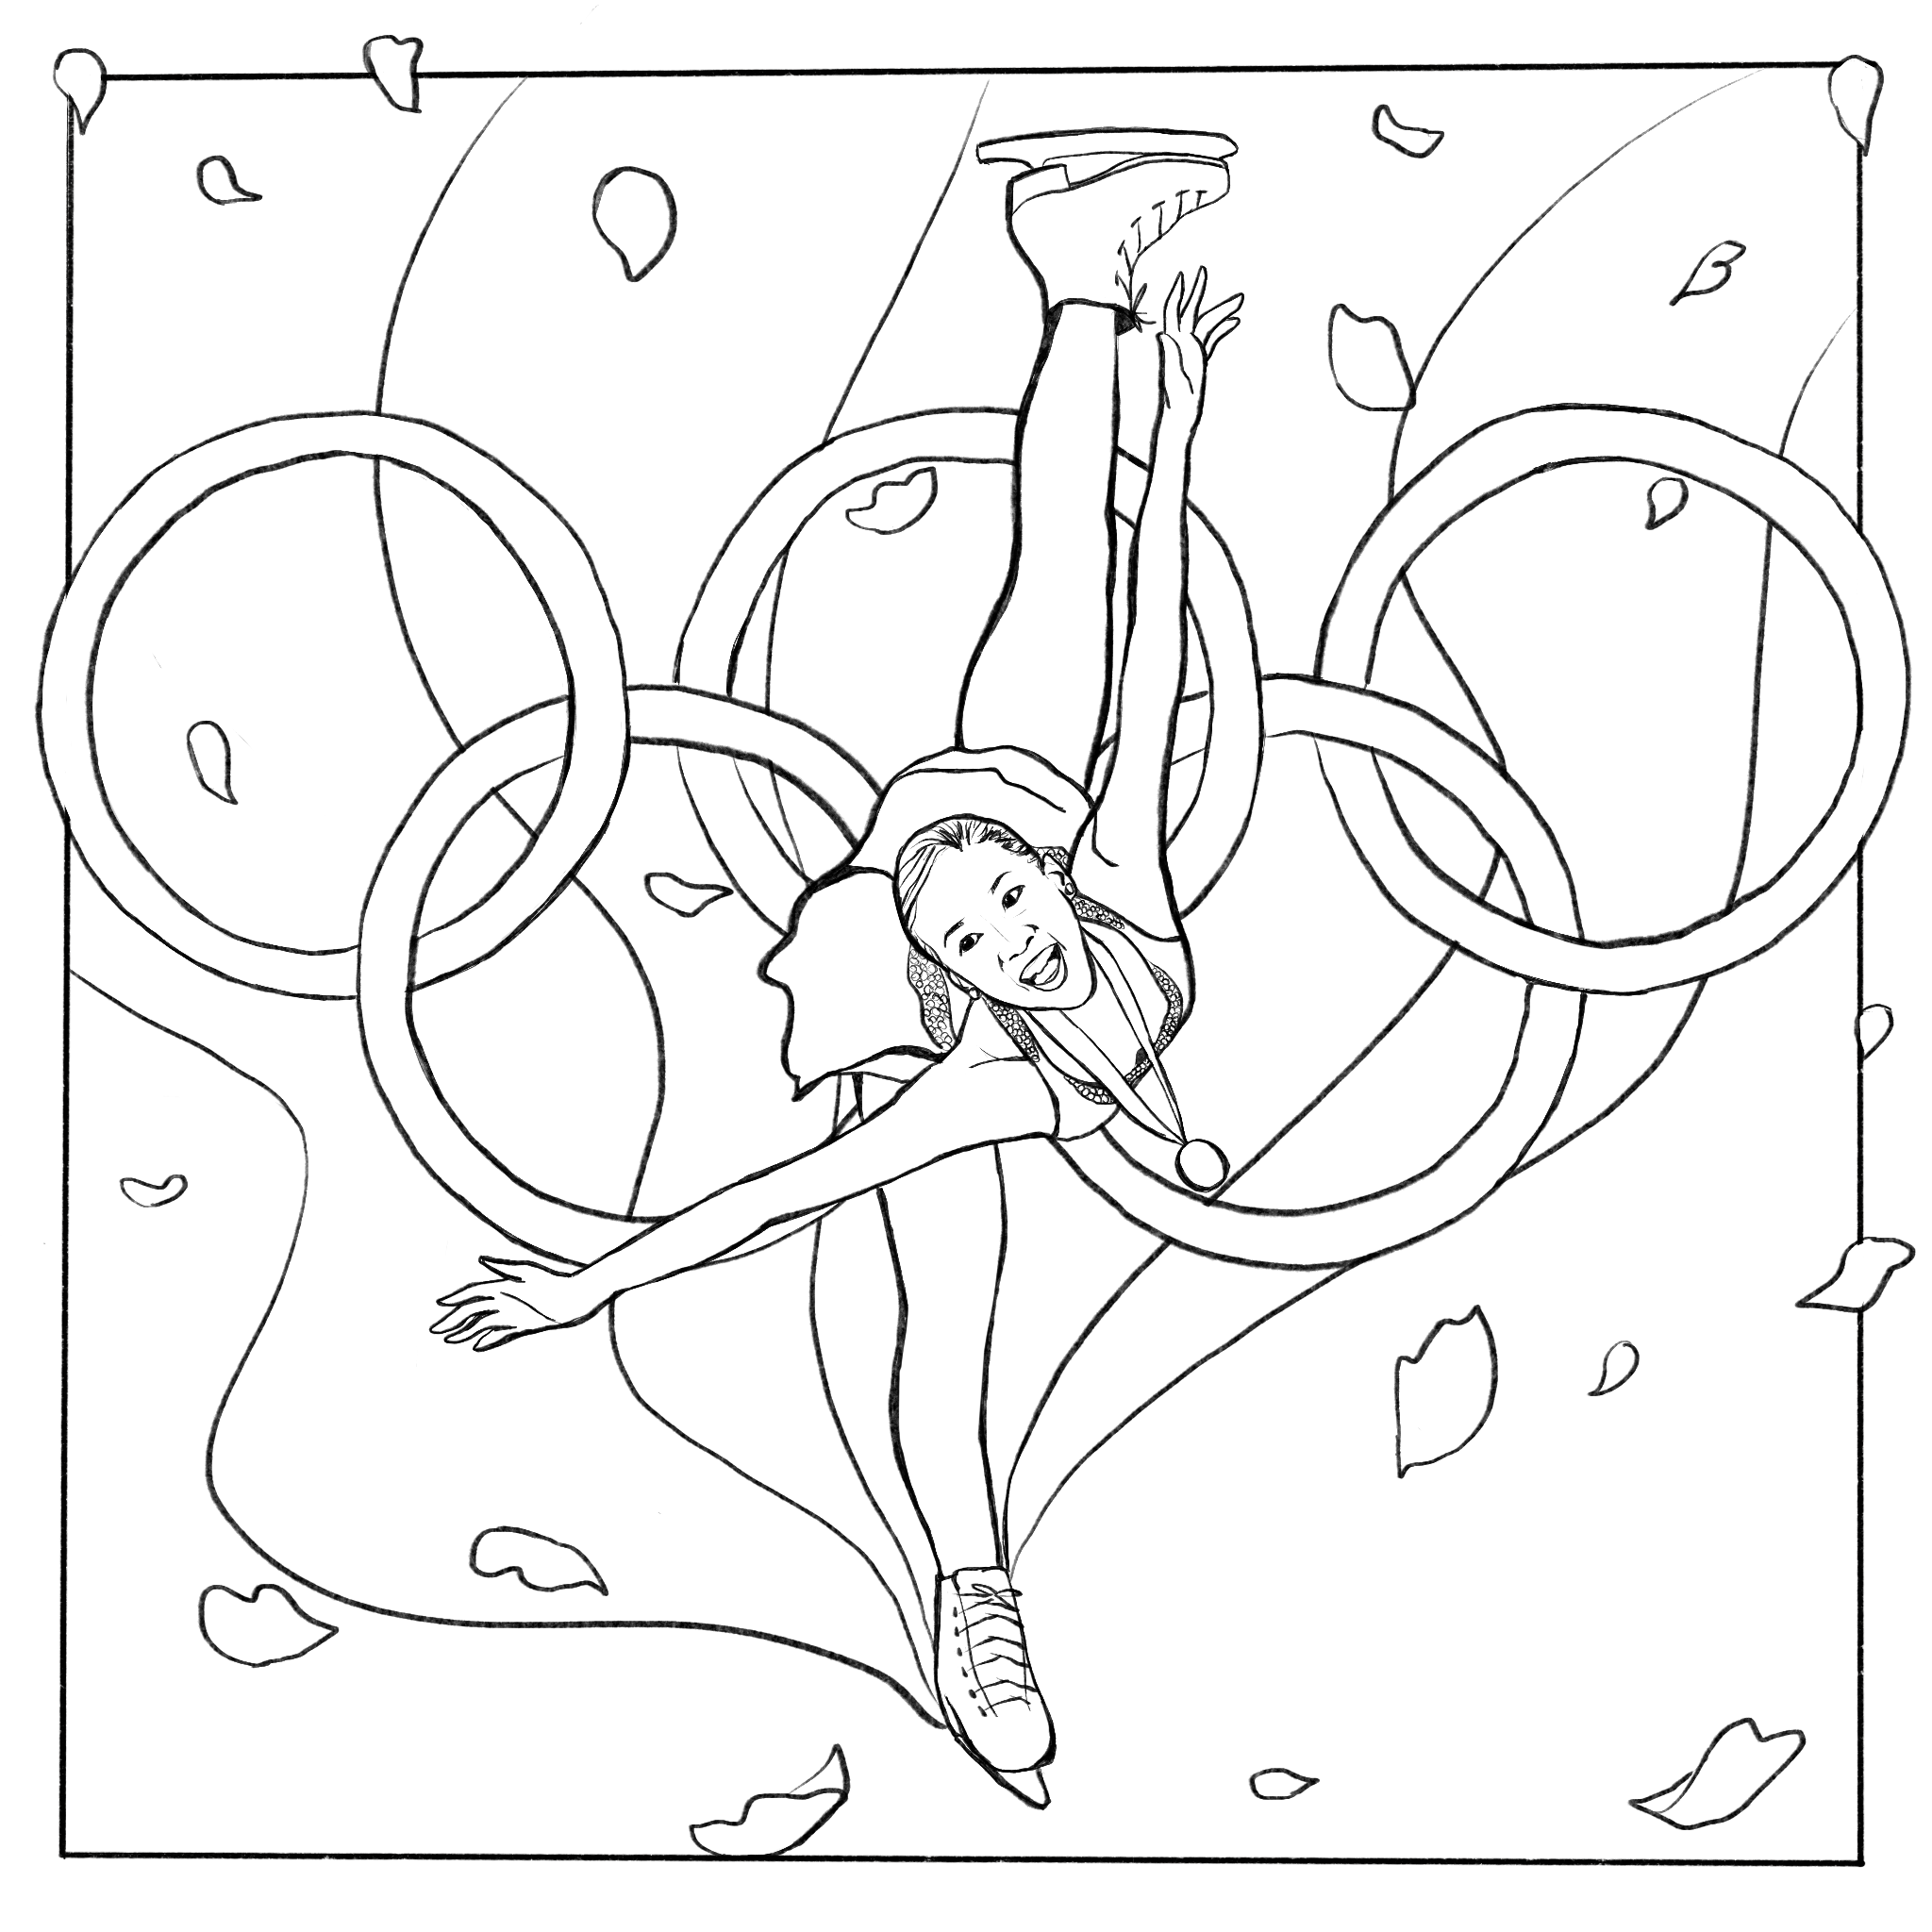 Michelle_Kwan_BW_Revised.png